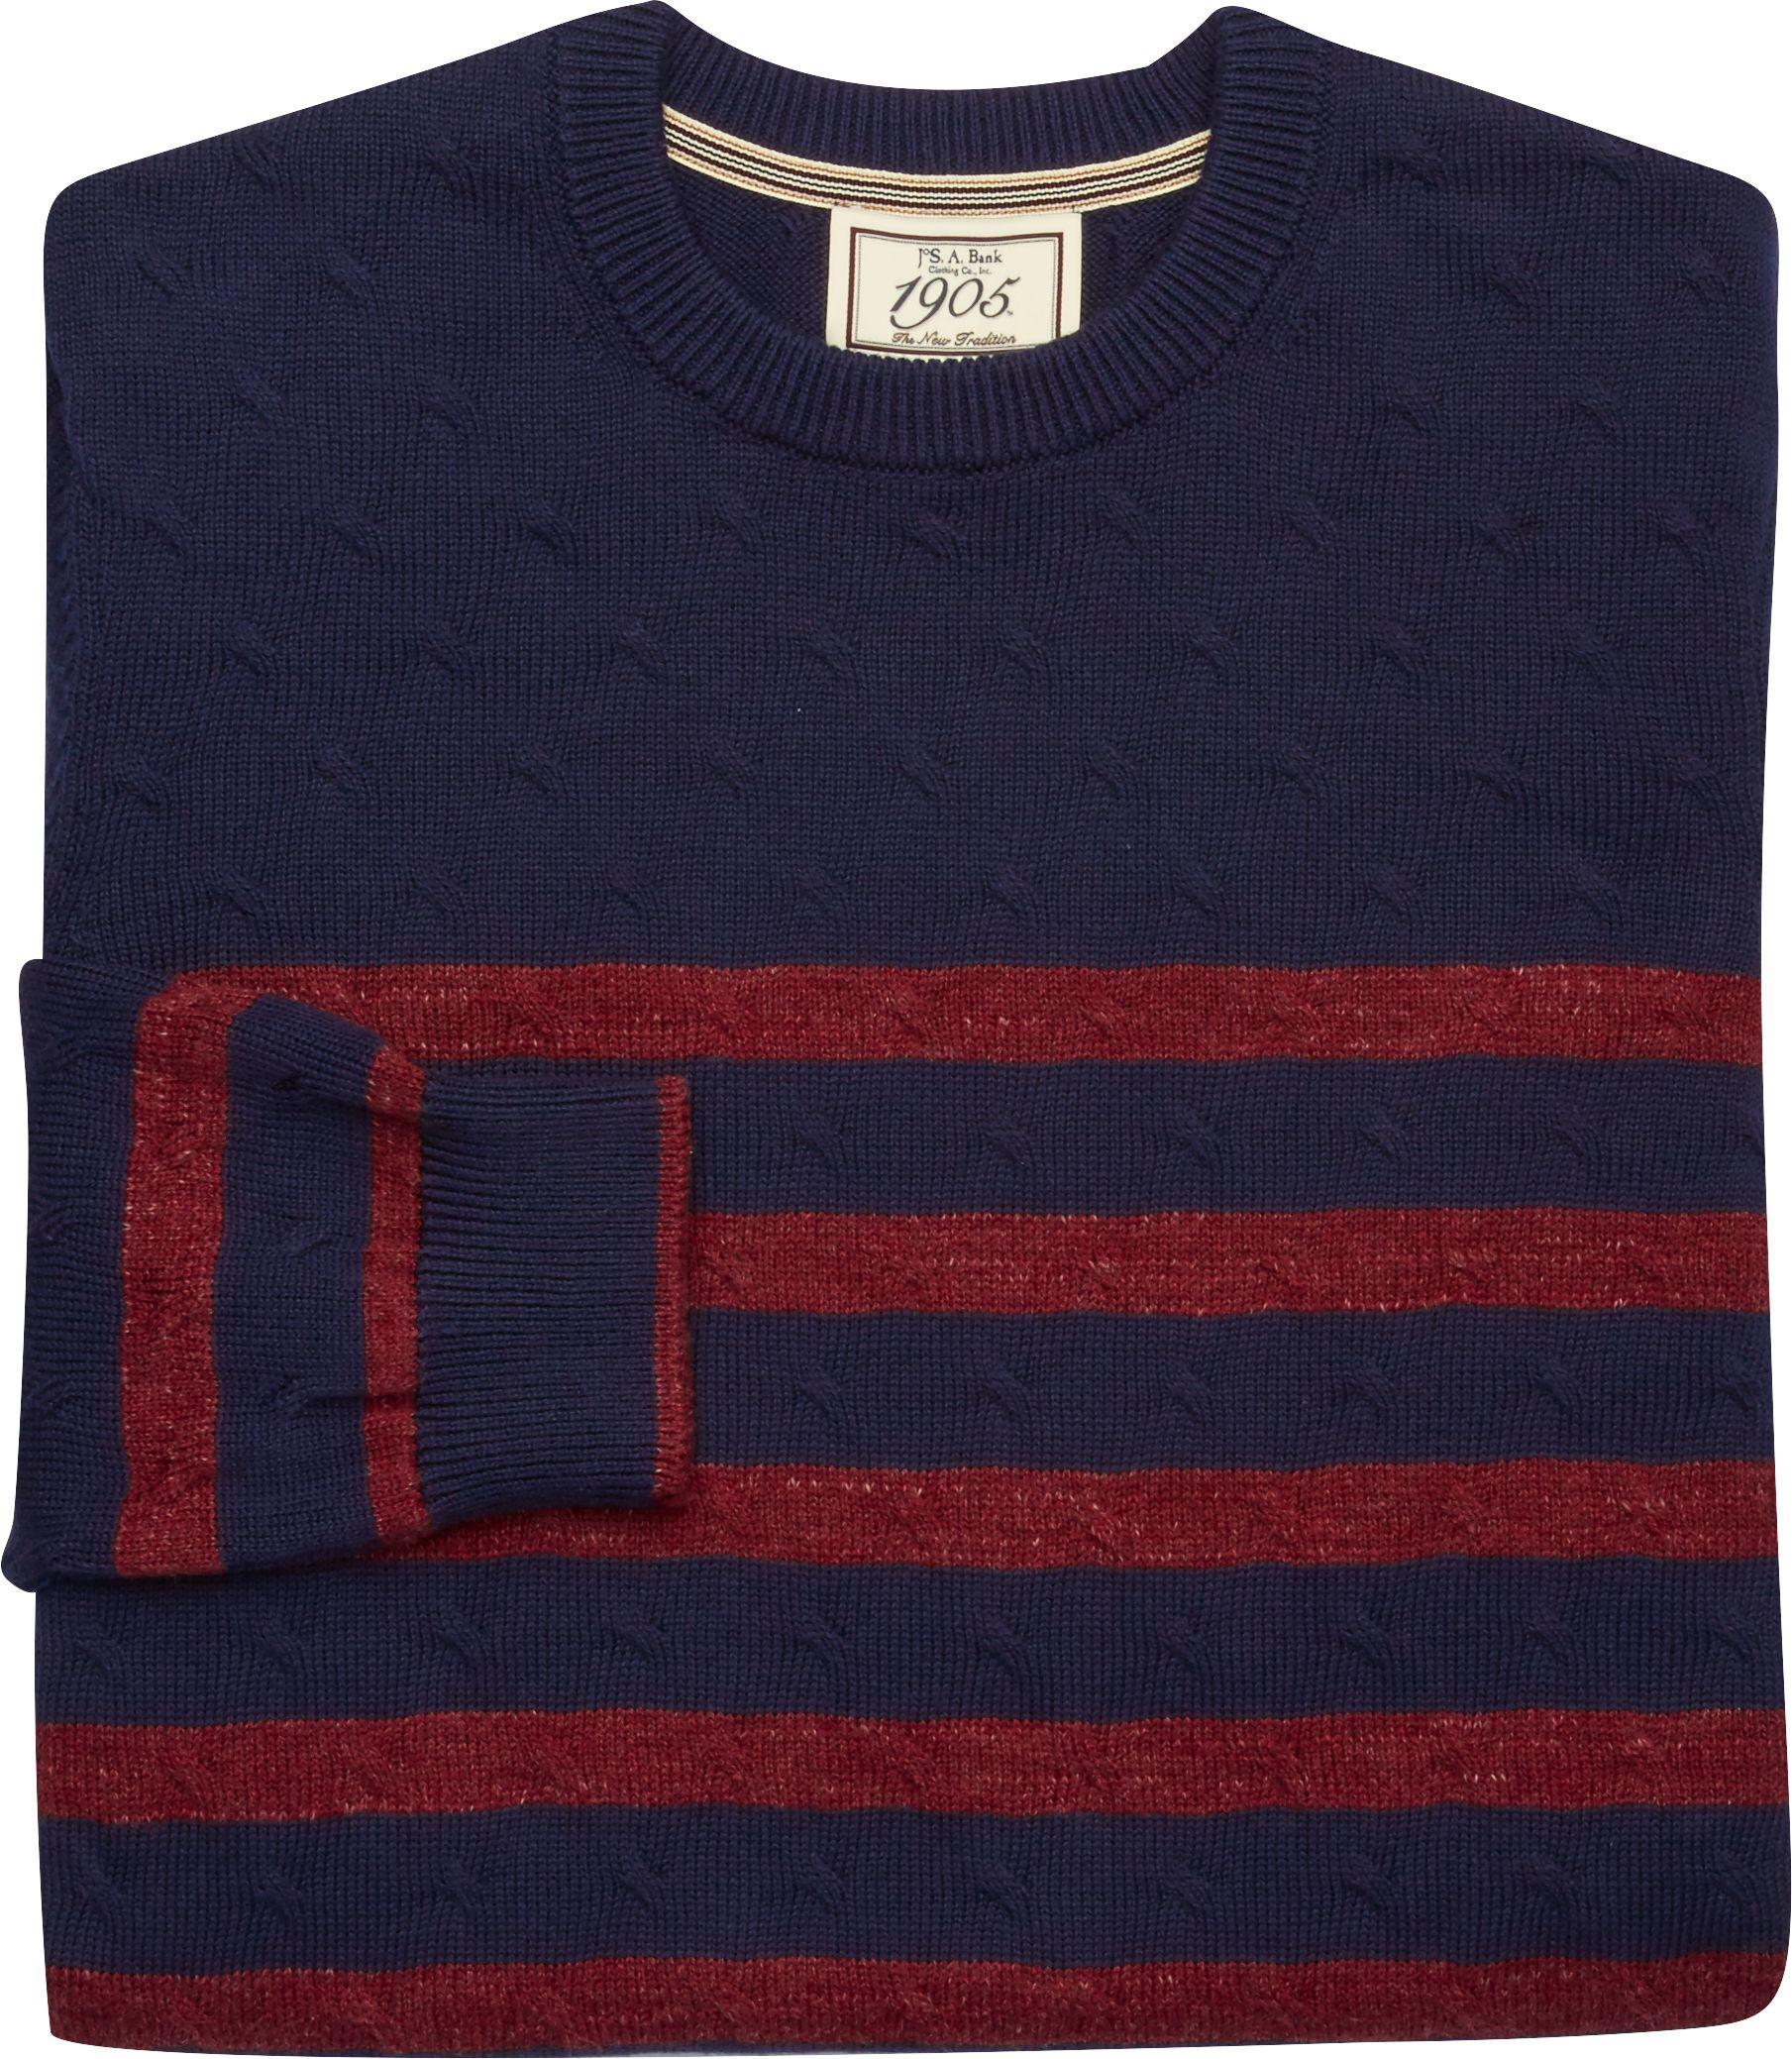 Lyst - Jos. A. Bank 1905 Collection Cotton Stripe Sweater Clearance in ...